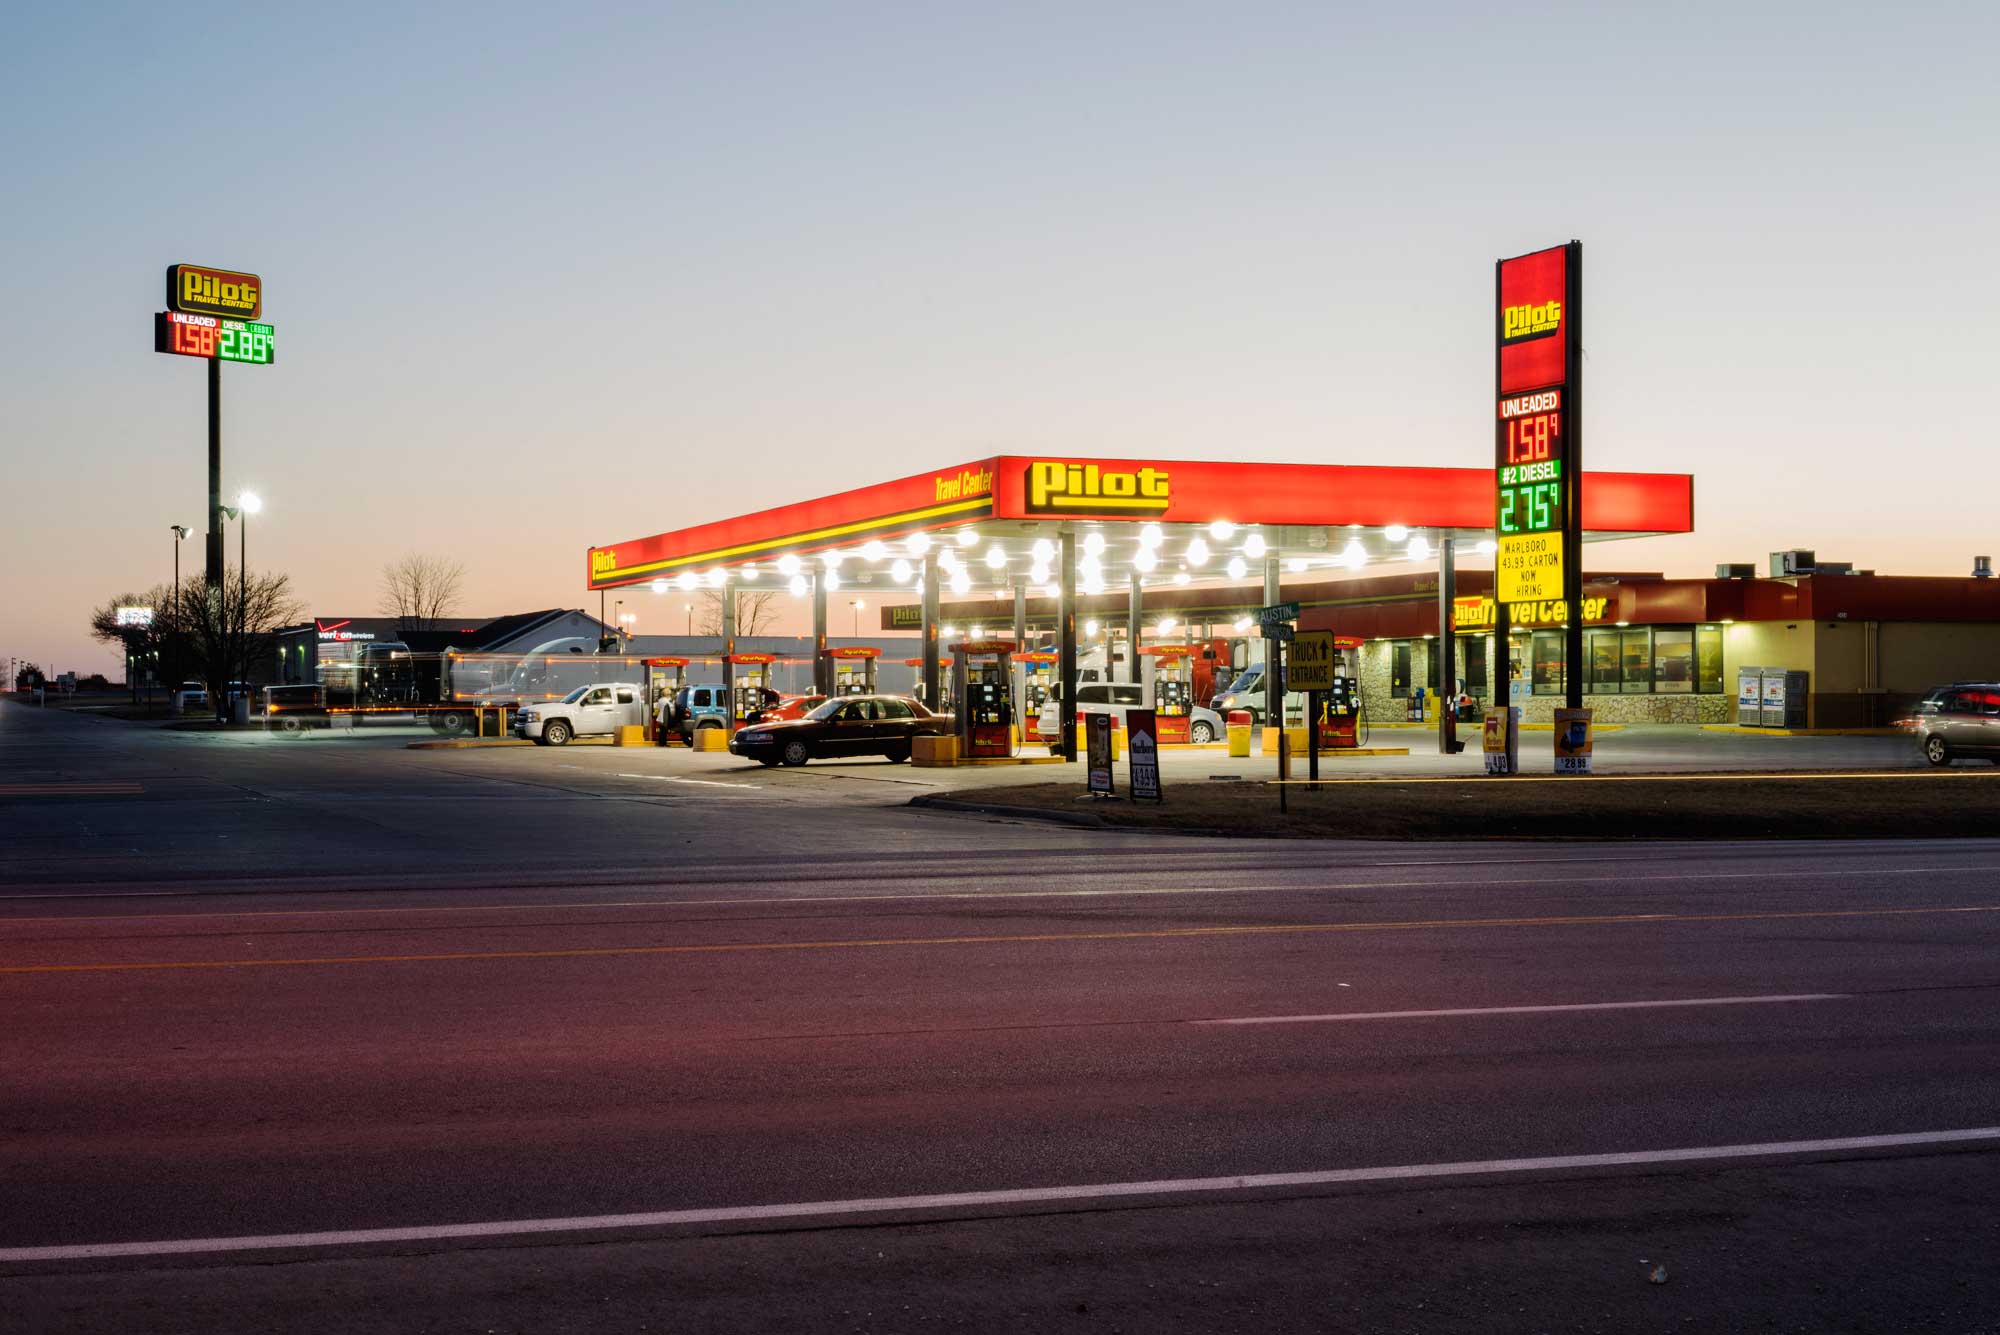 A gallon of gas went for $1.58 at this gas station on Jan. 15, 2015 in Nevada, Mo.